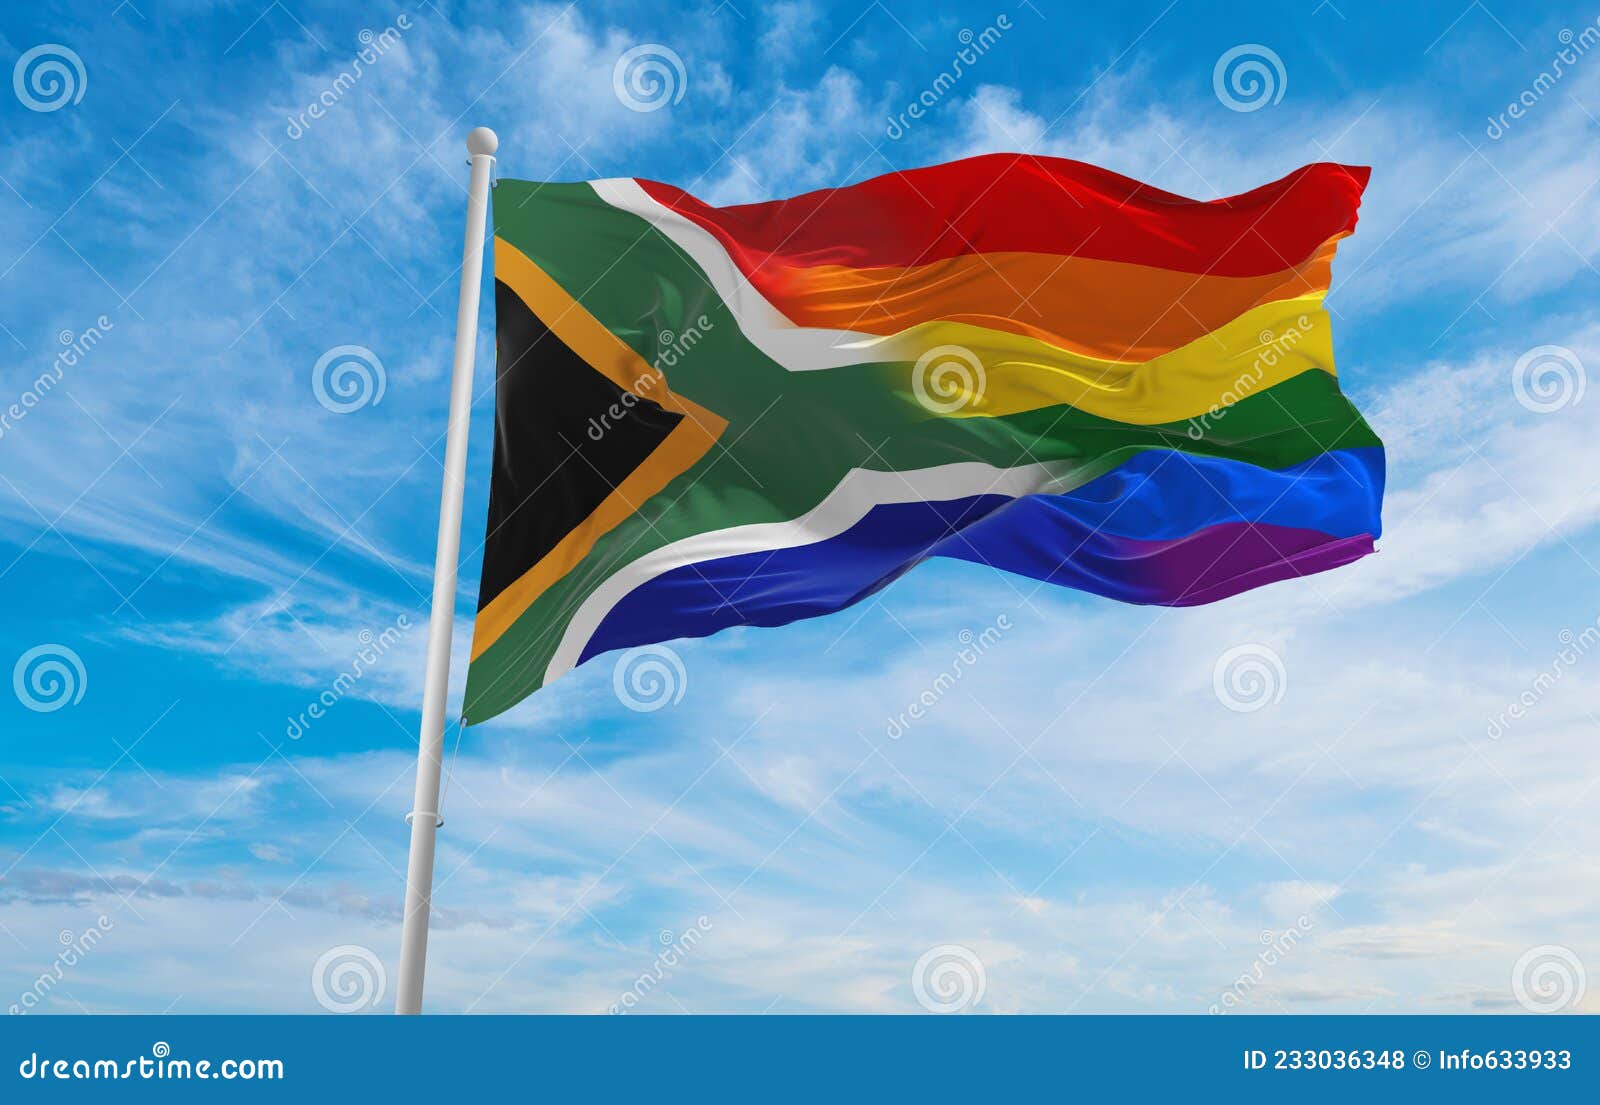 National Lgbt Flag Of South Africa Flag Waving In The Wind At Cloudy Sky Freedom And Love